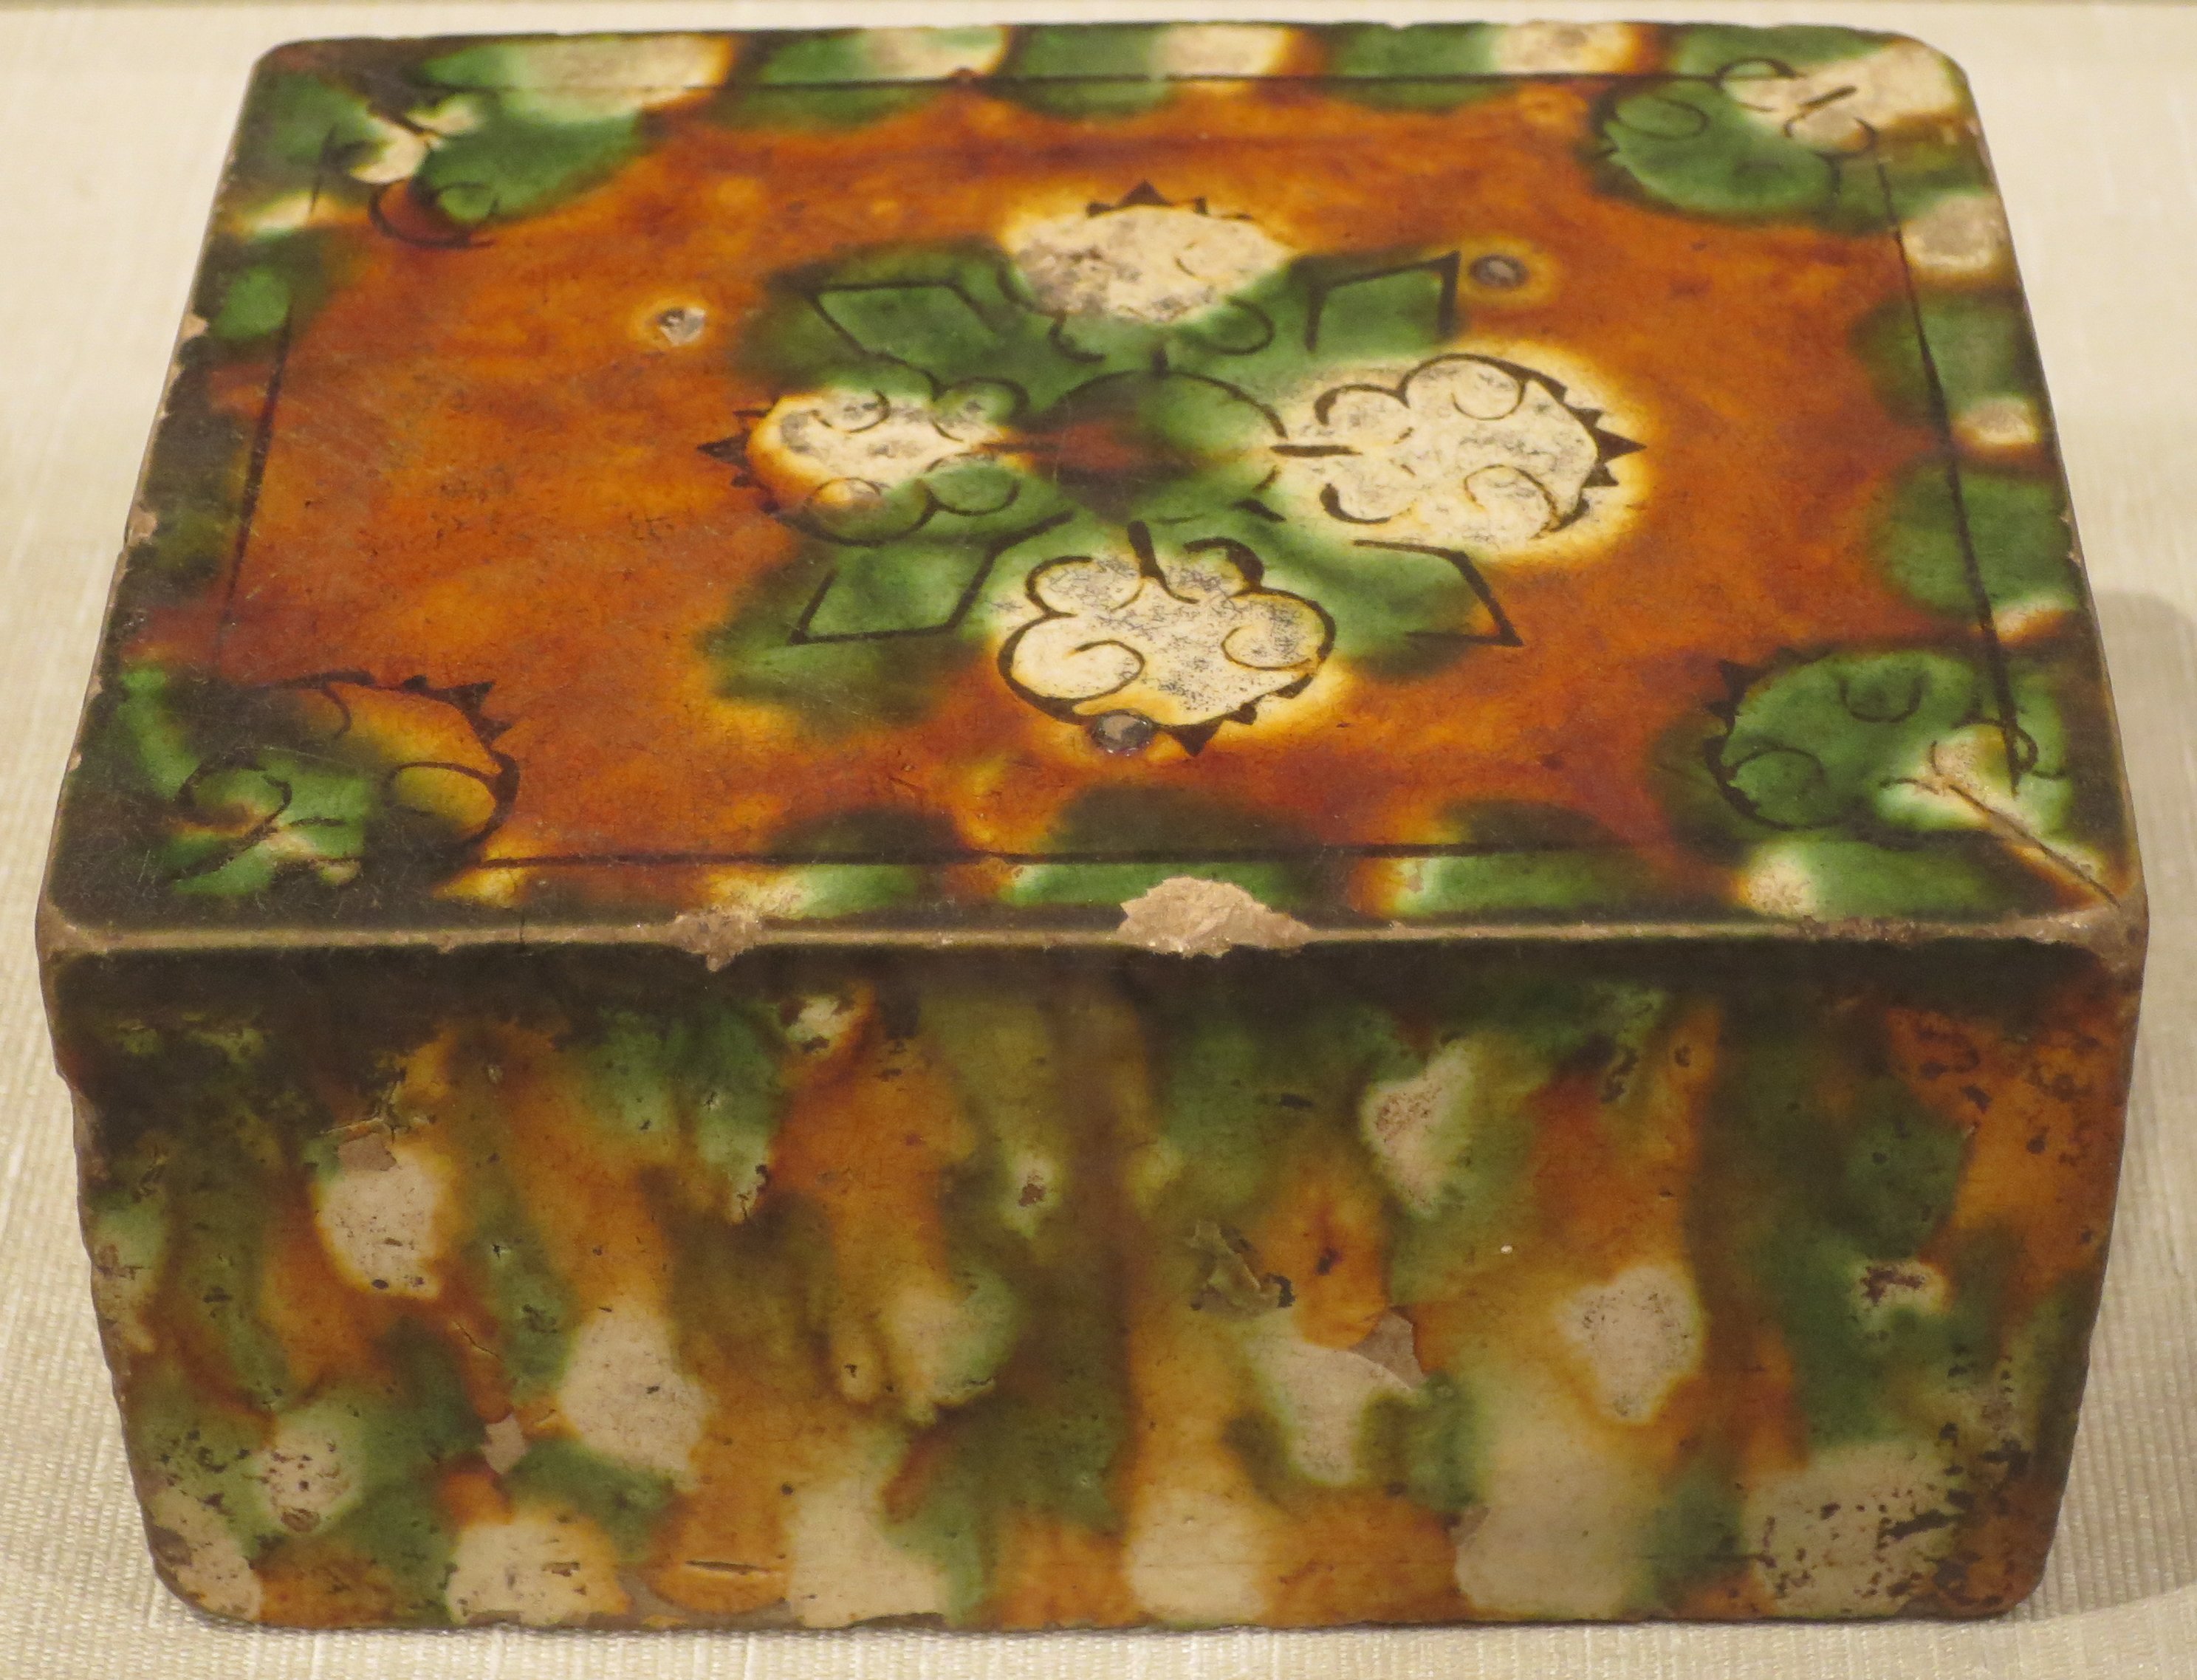 Wrist_rest_from_China,_Tang_dynasty_(618-906),_earthenware_with_sancai_glaze,_HAA.JPG